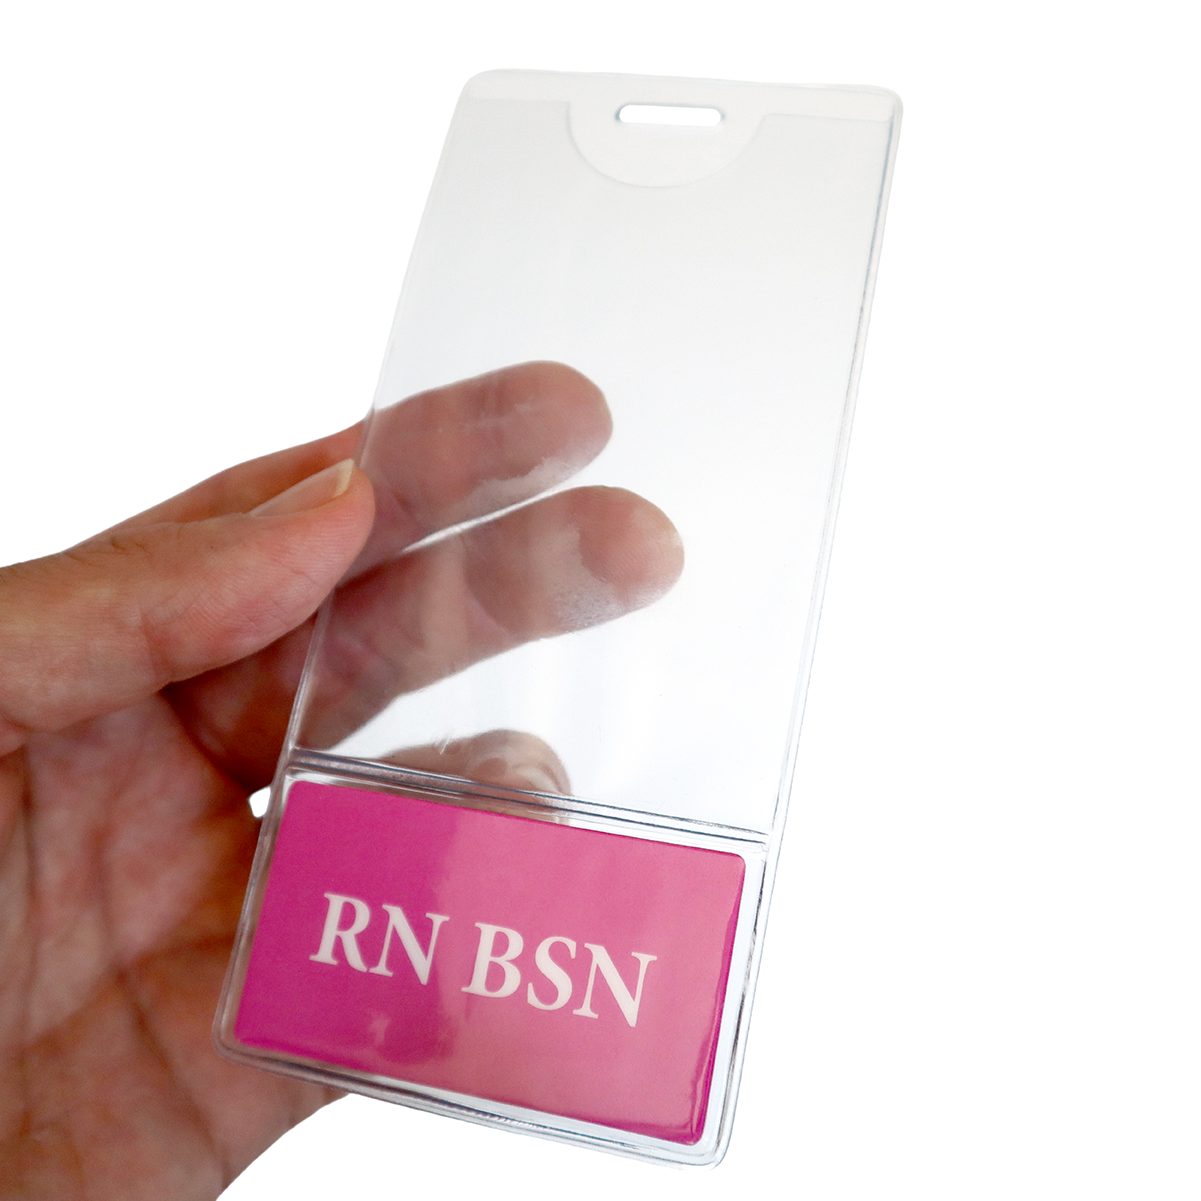 RN BSN BadgeBottoms 2 in 1 Badge Buddy and ID Badge Holder - Vinyl Sleeve for ID Card and Badge Bottom for Role Tag - Double Sided Print (hot pink)